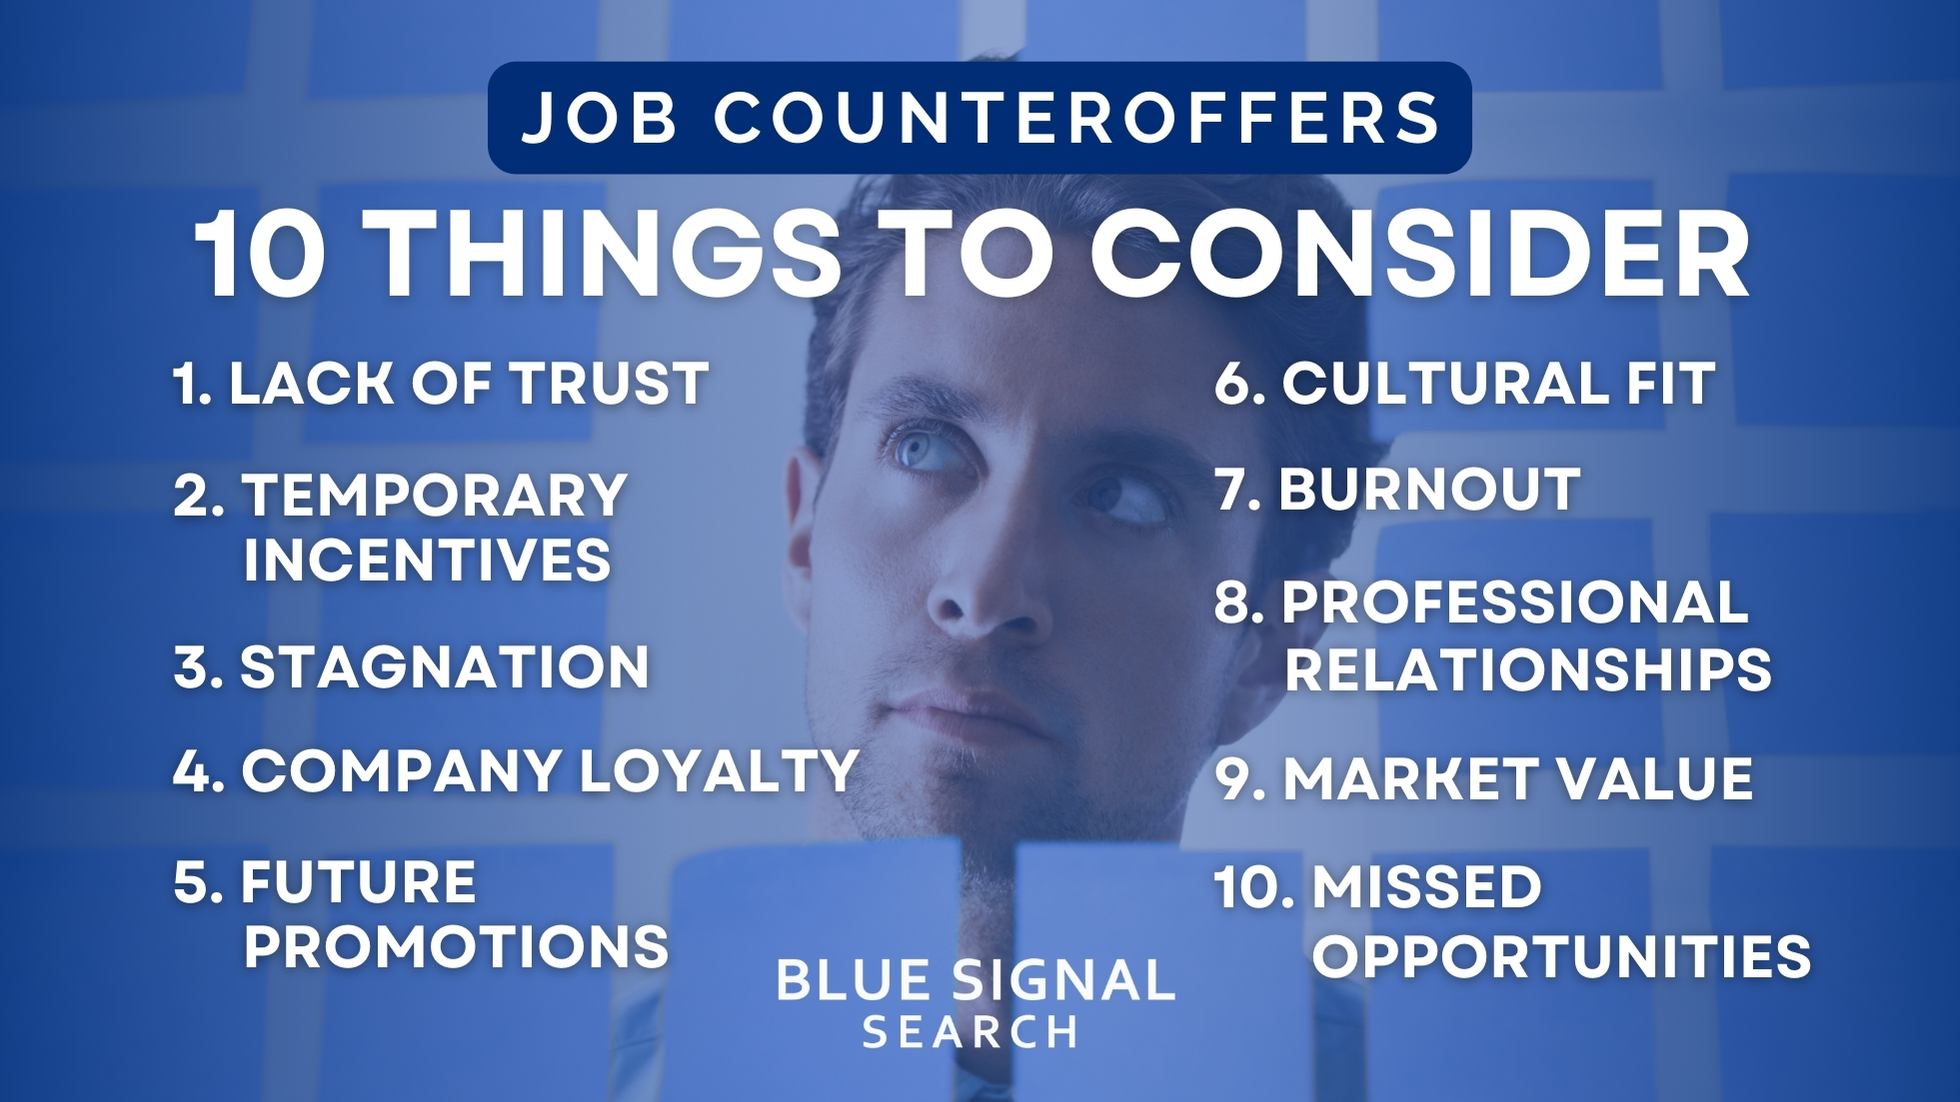 "Job Counteroffers: 10 Things to consider" displayed over a list of 10 reasons on top of an image of a man pondering sticky noted options on a glass.